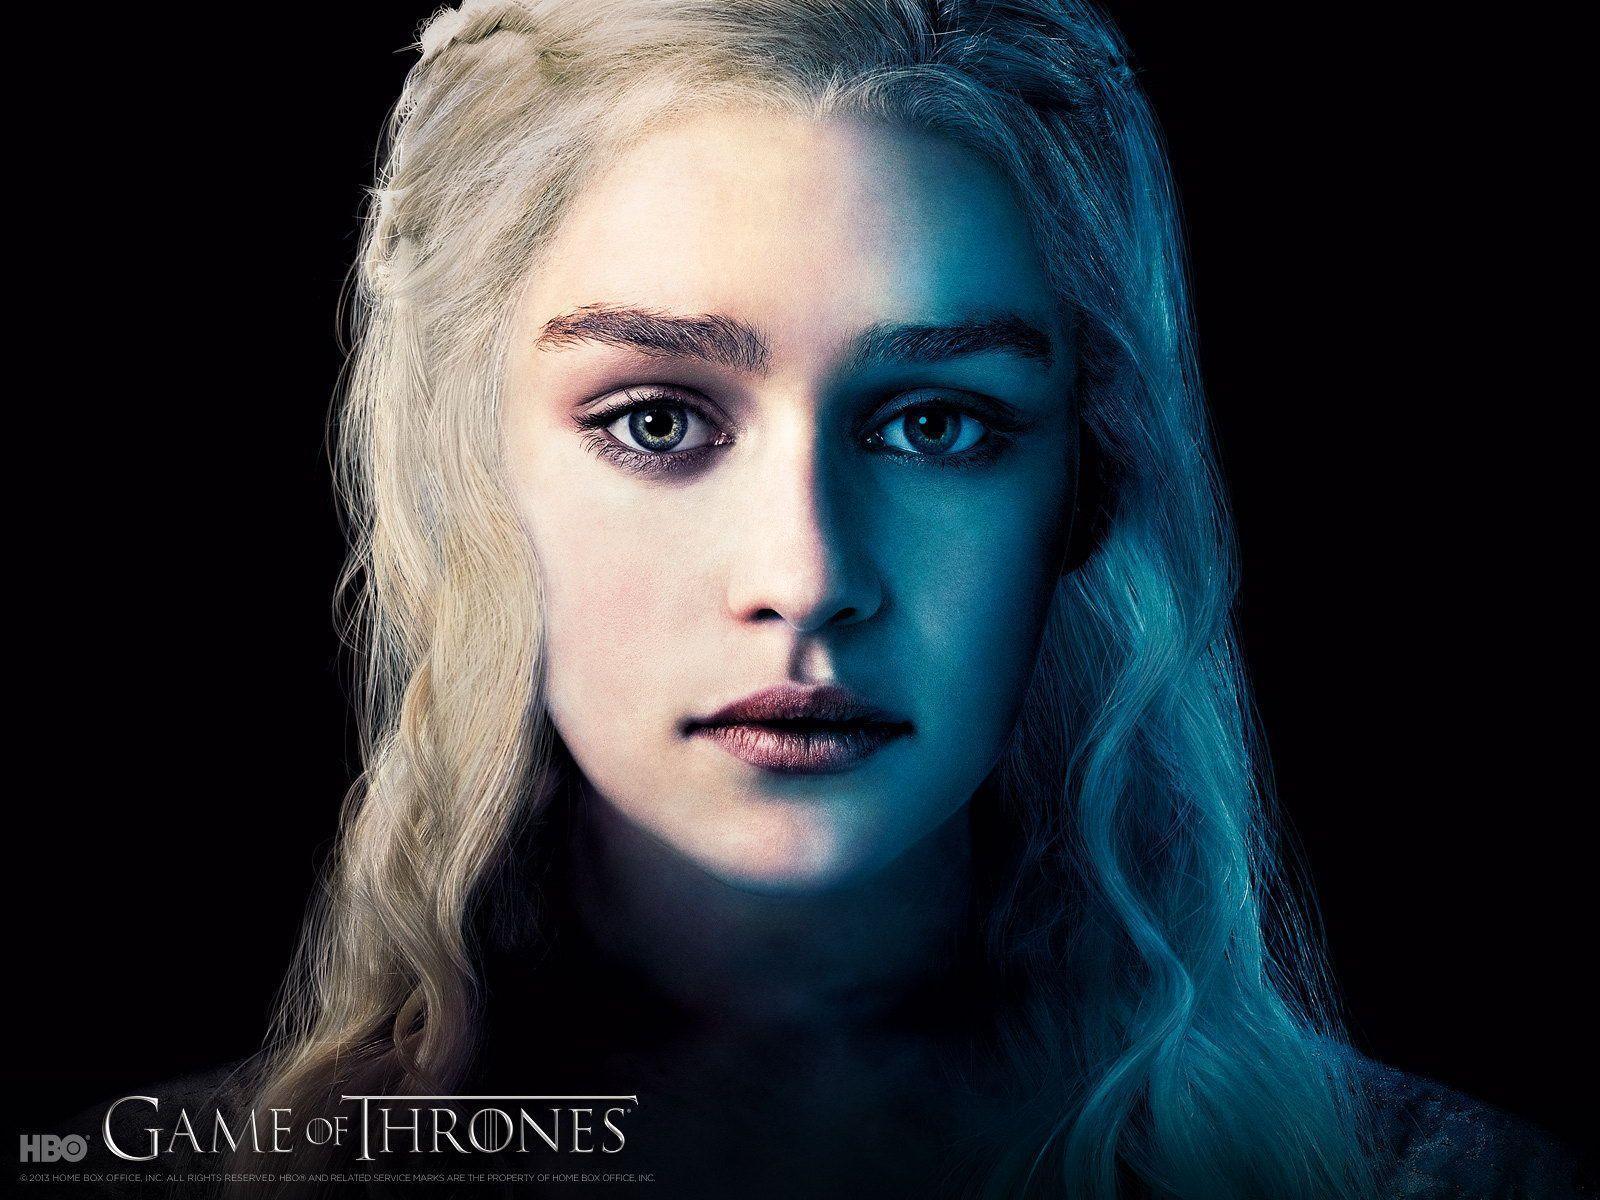 Game of Thrones Women Characters. HBO drama Game of Thrones